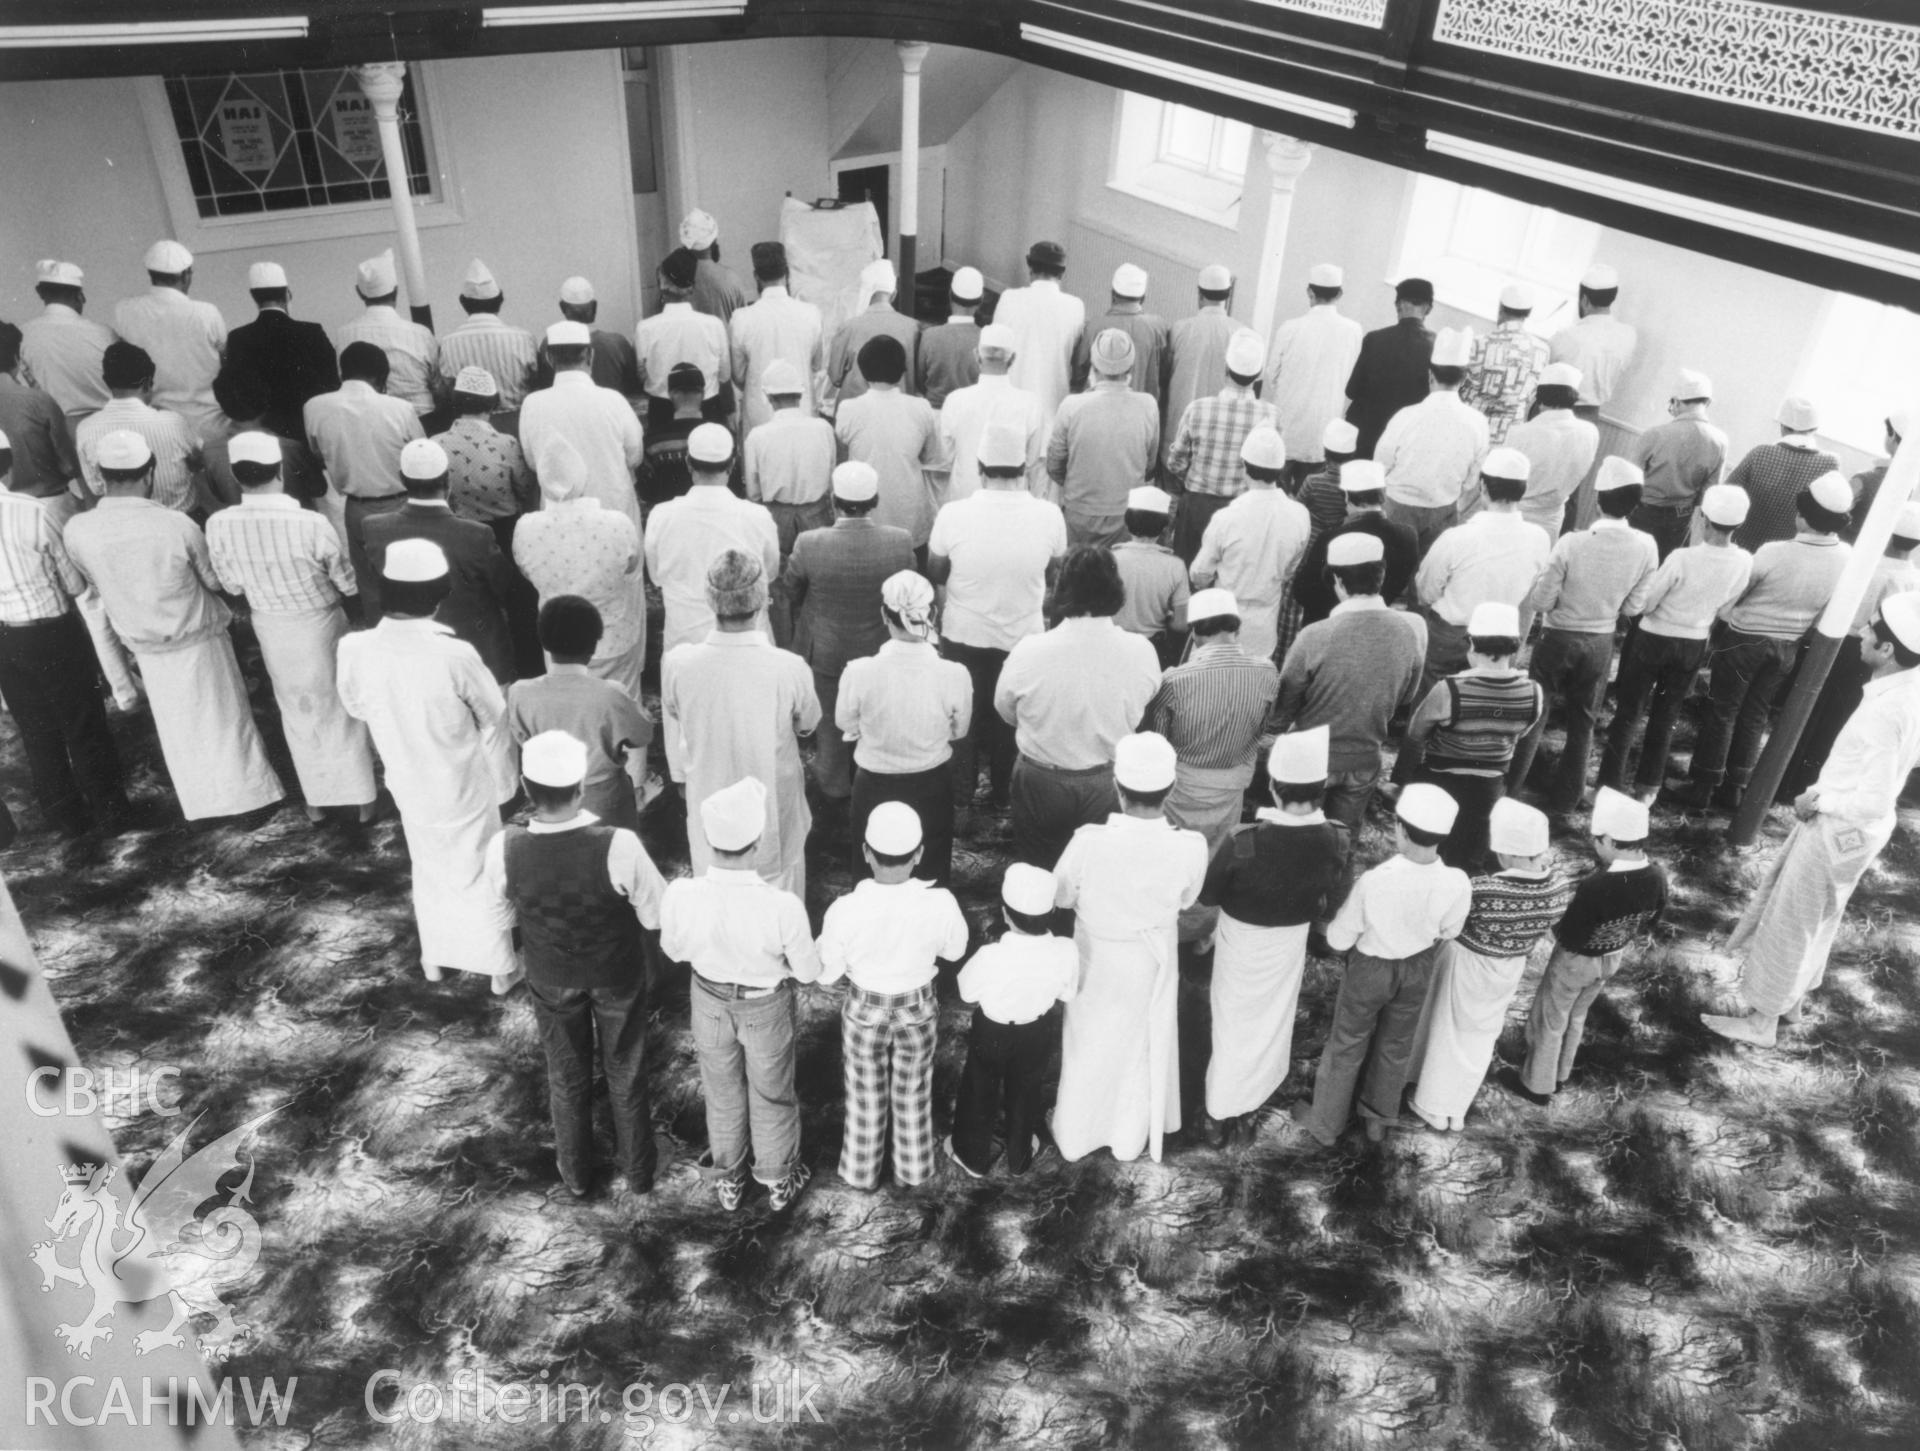 1 b/w print showing interior of Severn Road Mosque, Cardiff, with men and boys at prayer; collated by the former Central Office of Information.